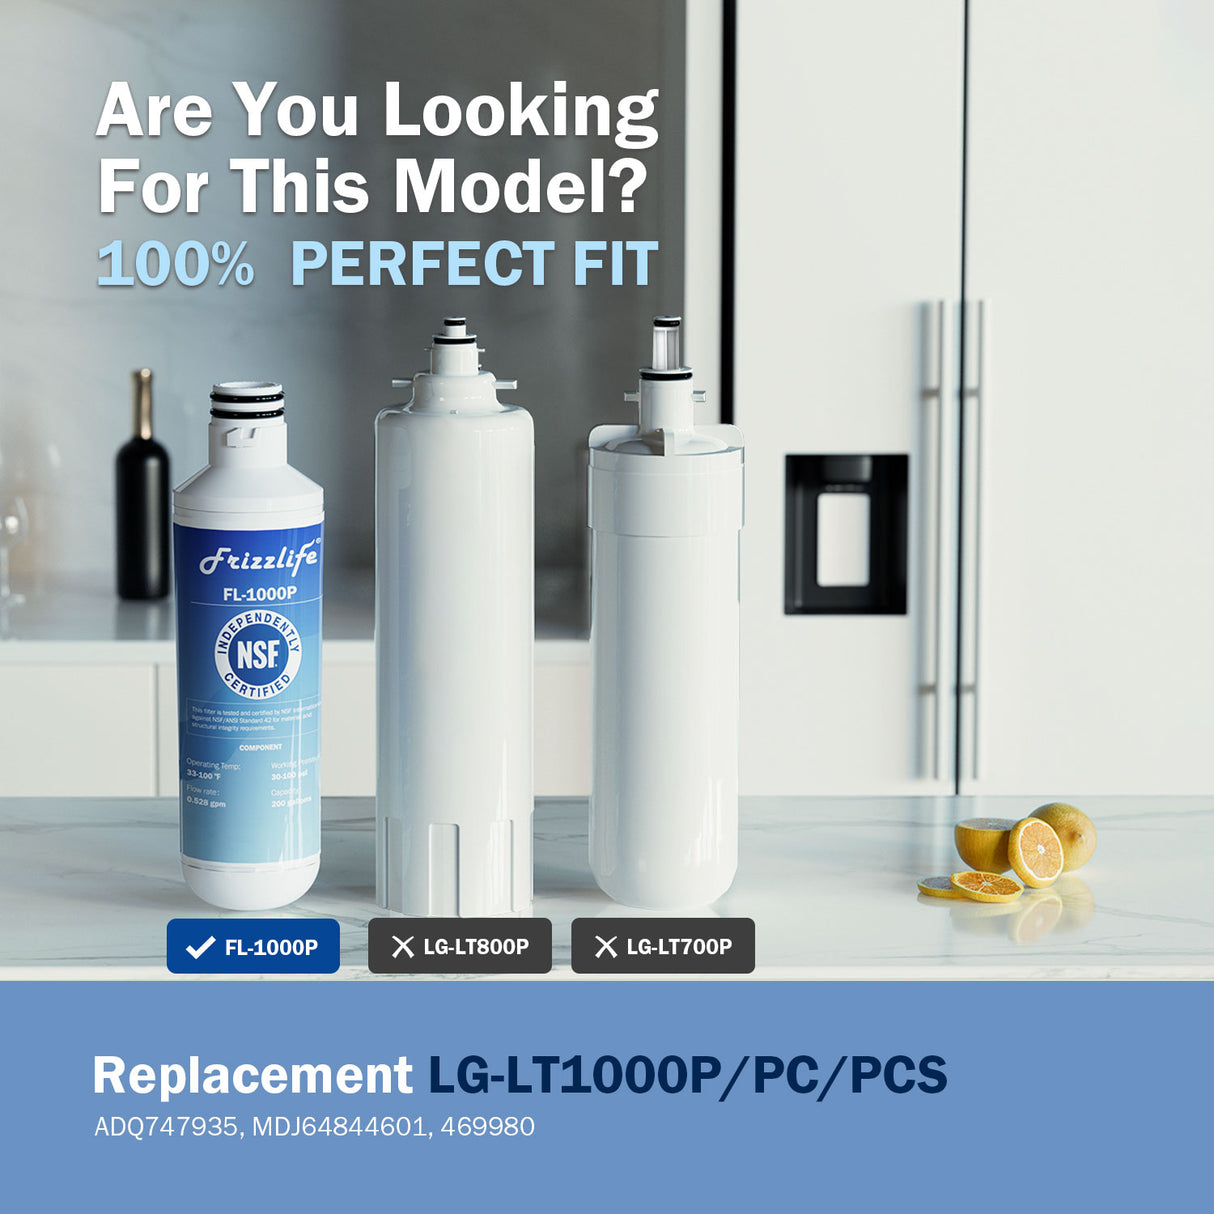 Frizzlife LT1000P Refrigerator Water Filter Replacement for LG LT1000P/PC/PCS, ADQ74793501, ADQ75795105, AGF80300704, NSF Certified Fit the Original Brand, Leak-proof Design